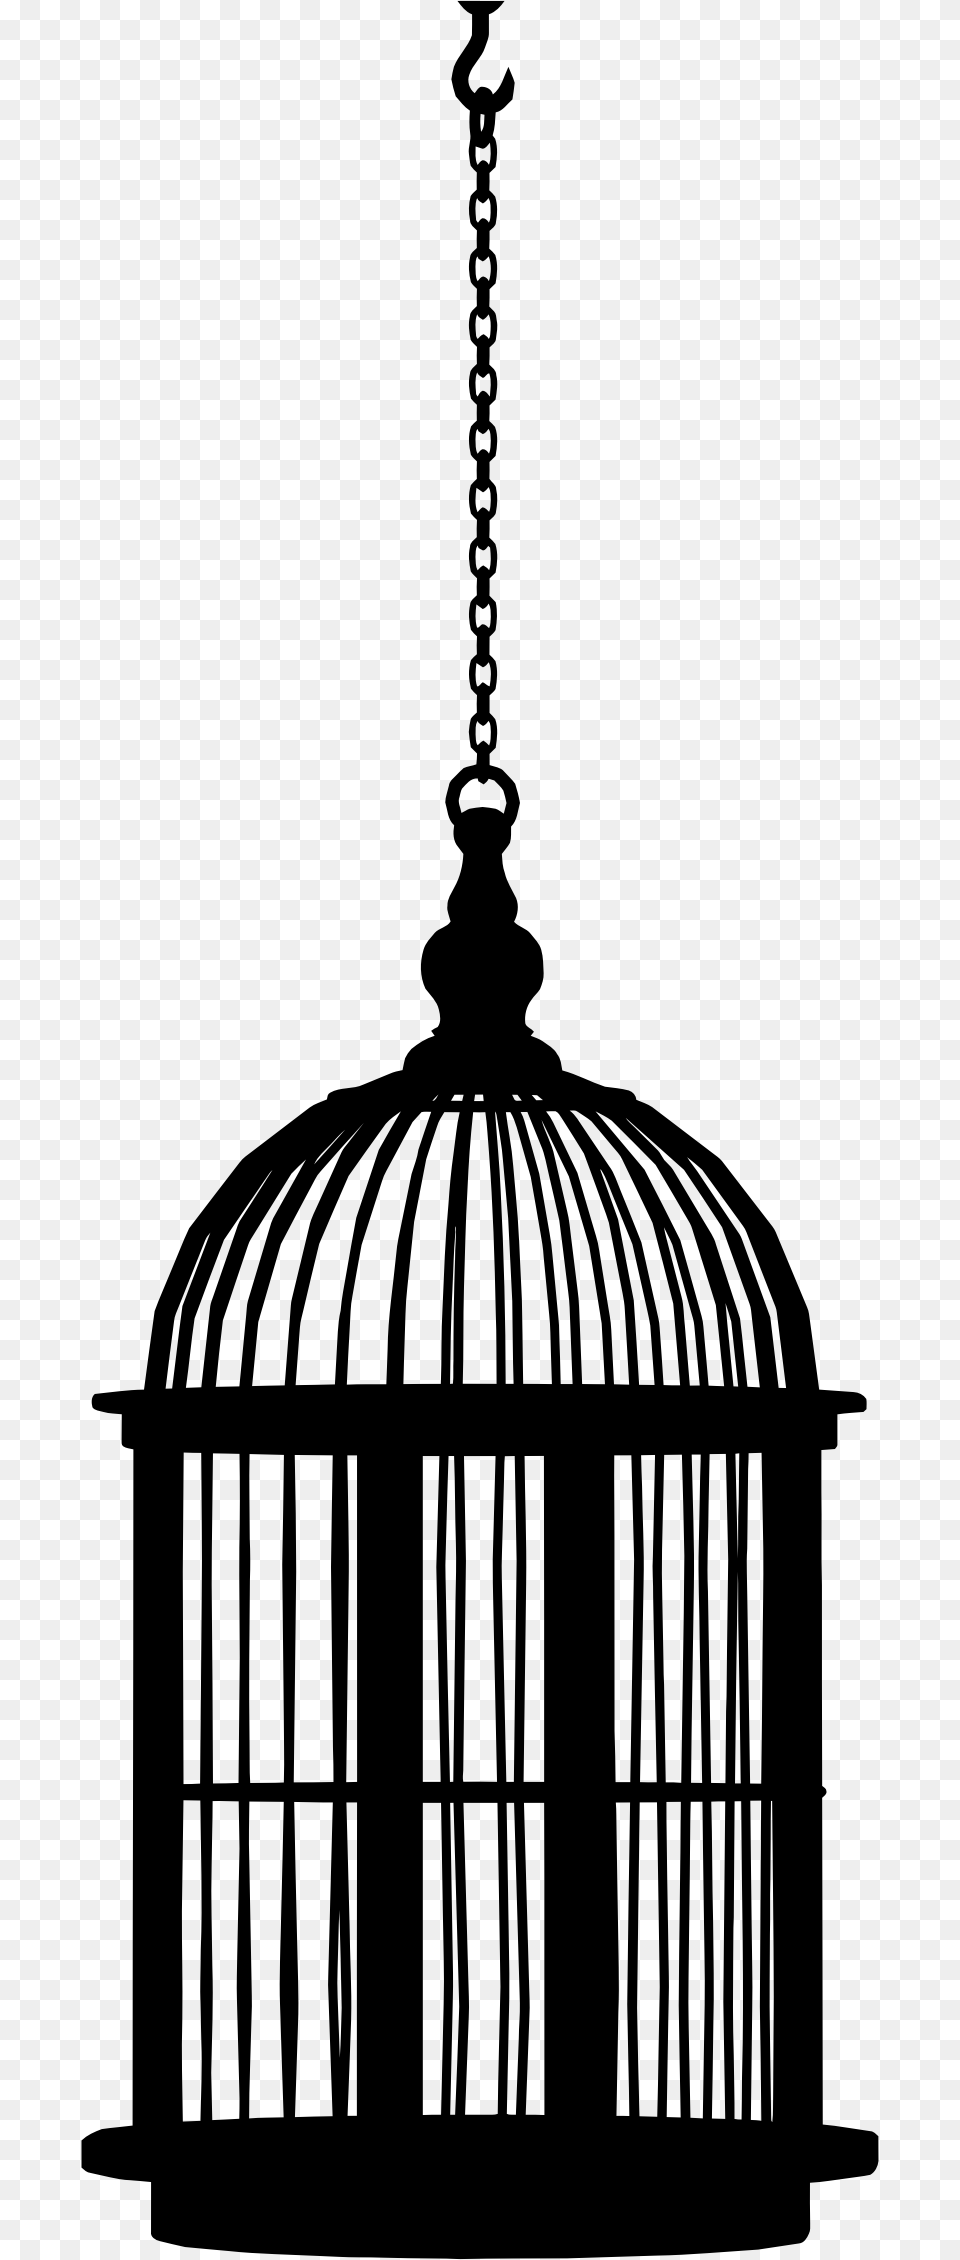 Cage Bird Image Cage Without A Bird, Gray Png